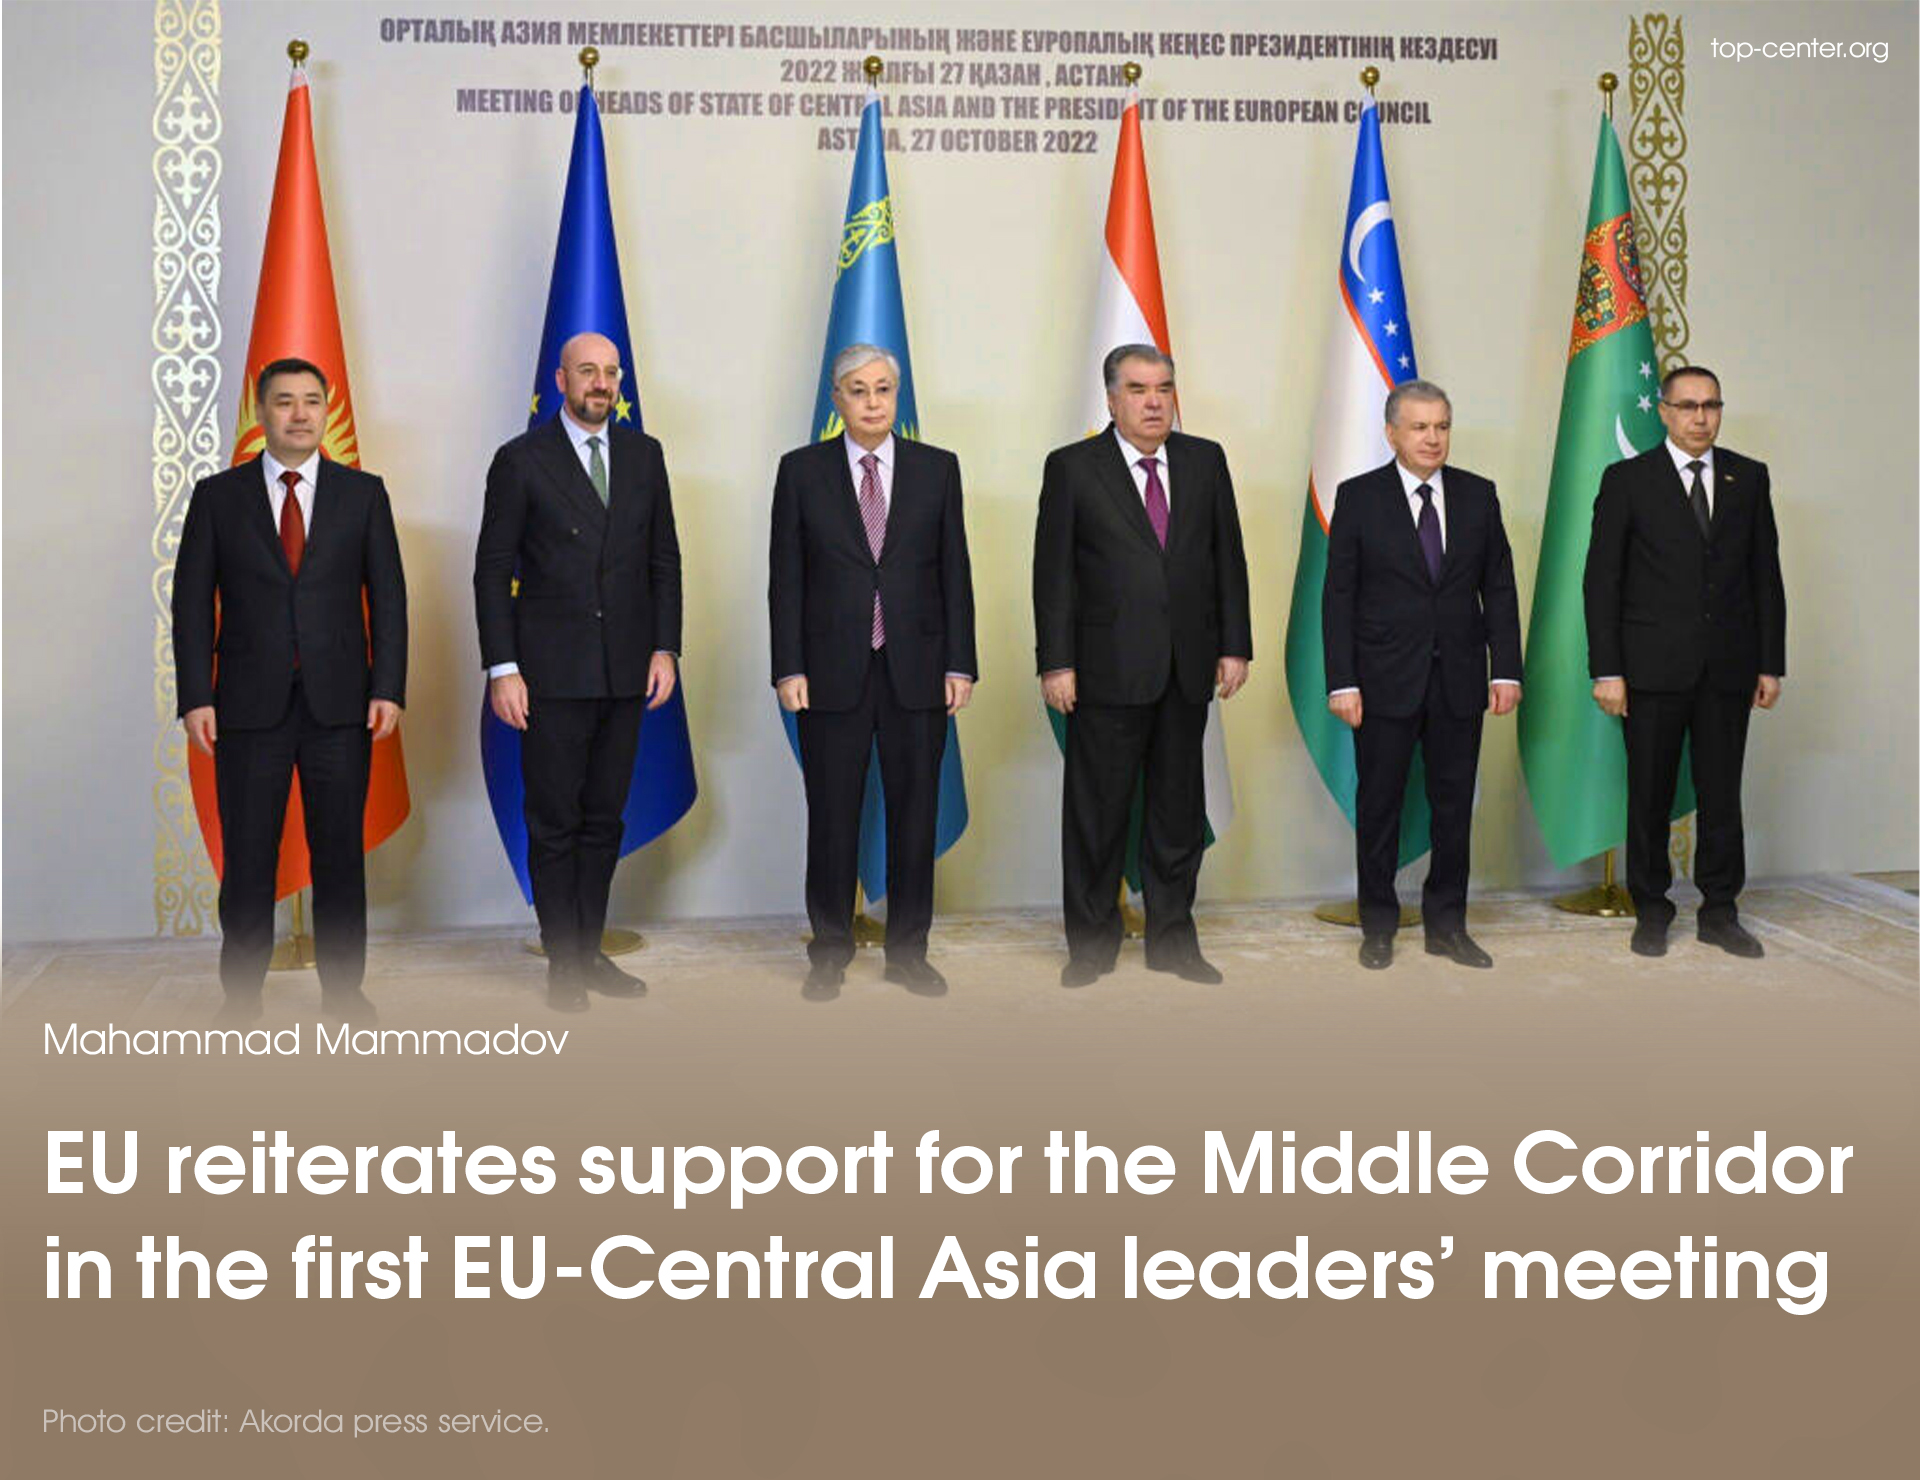 EU reiterates support for the Middle Corridor in the first EU-Central Asia leaders’ meeting